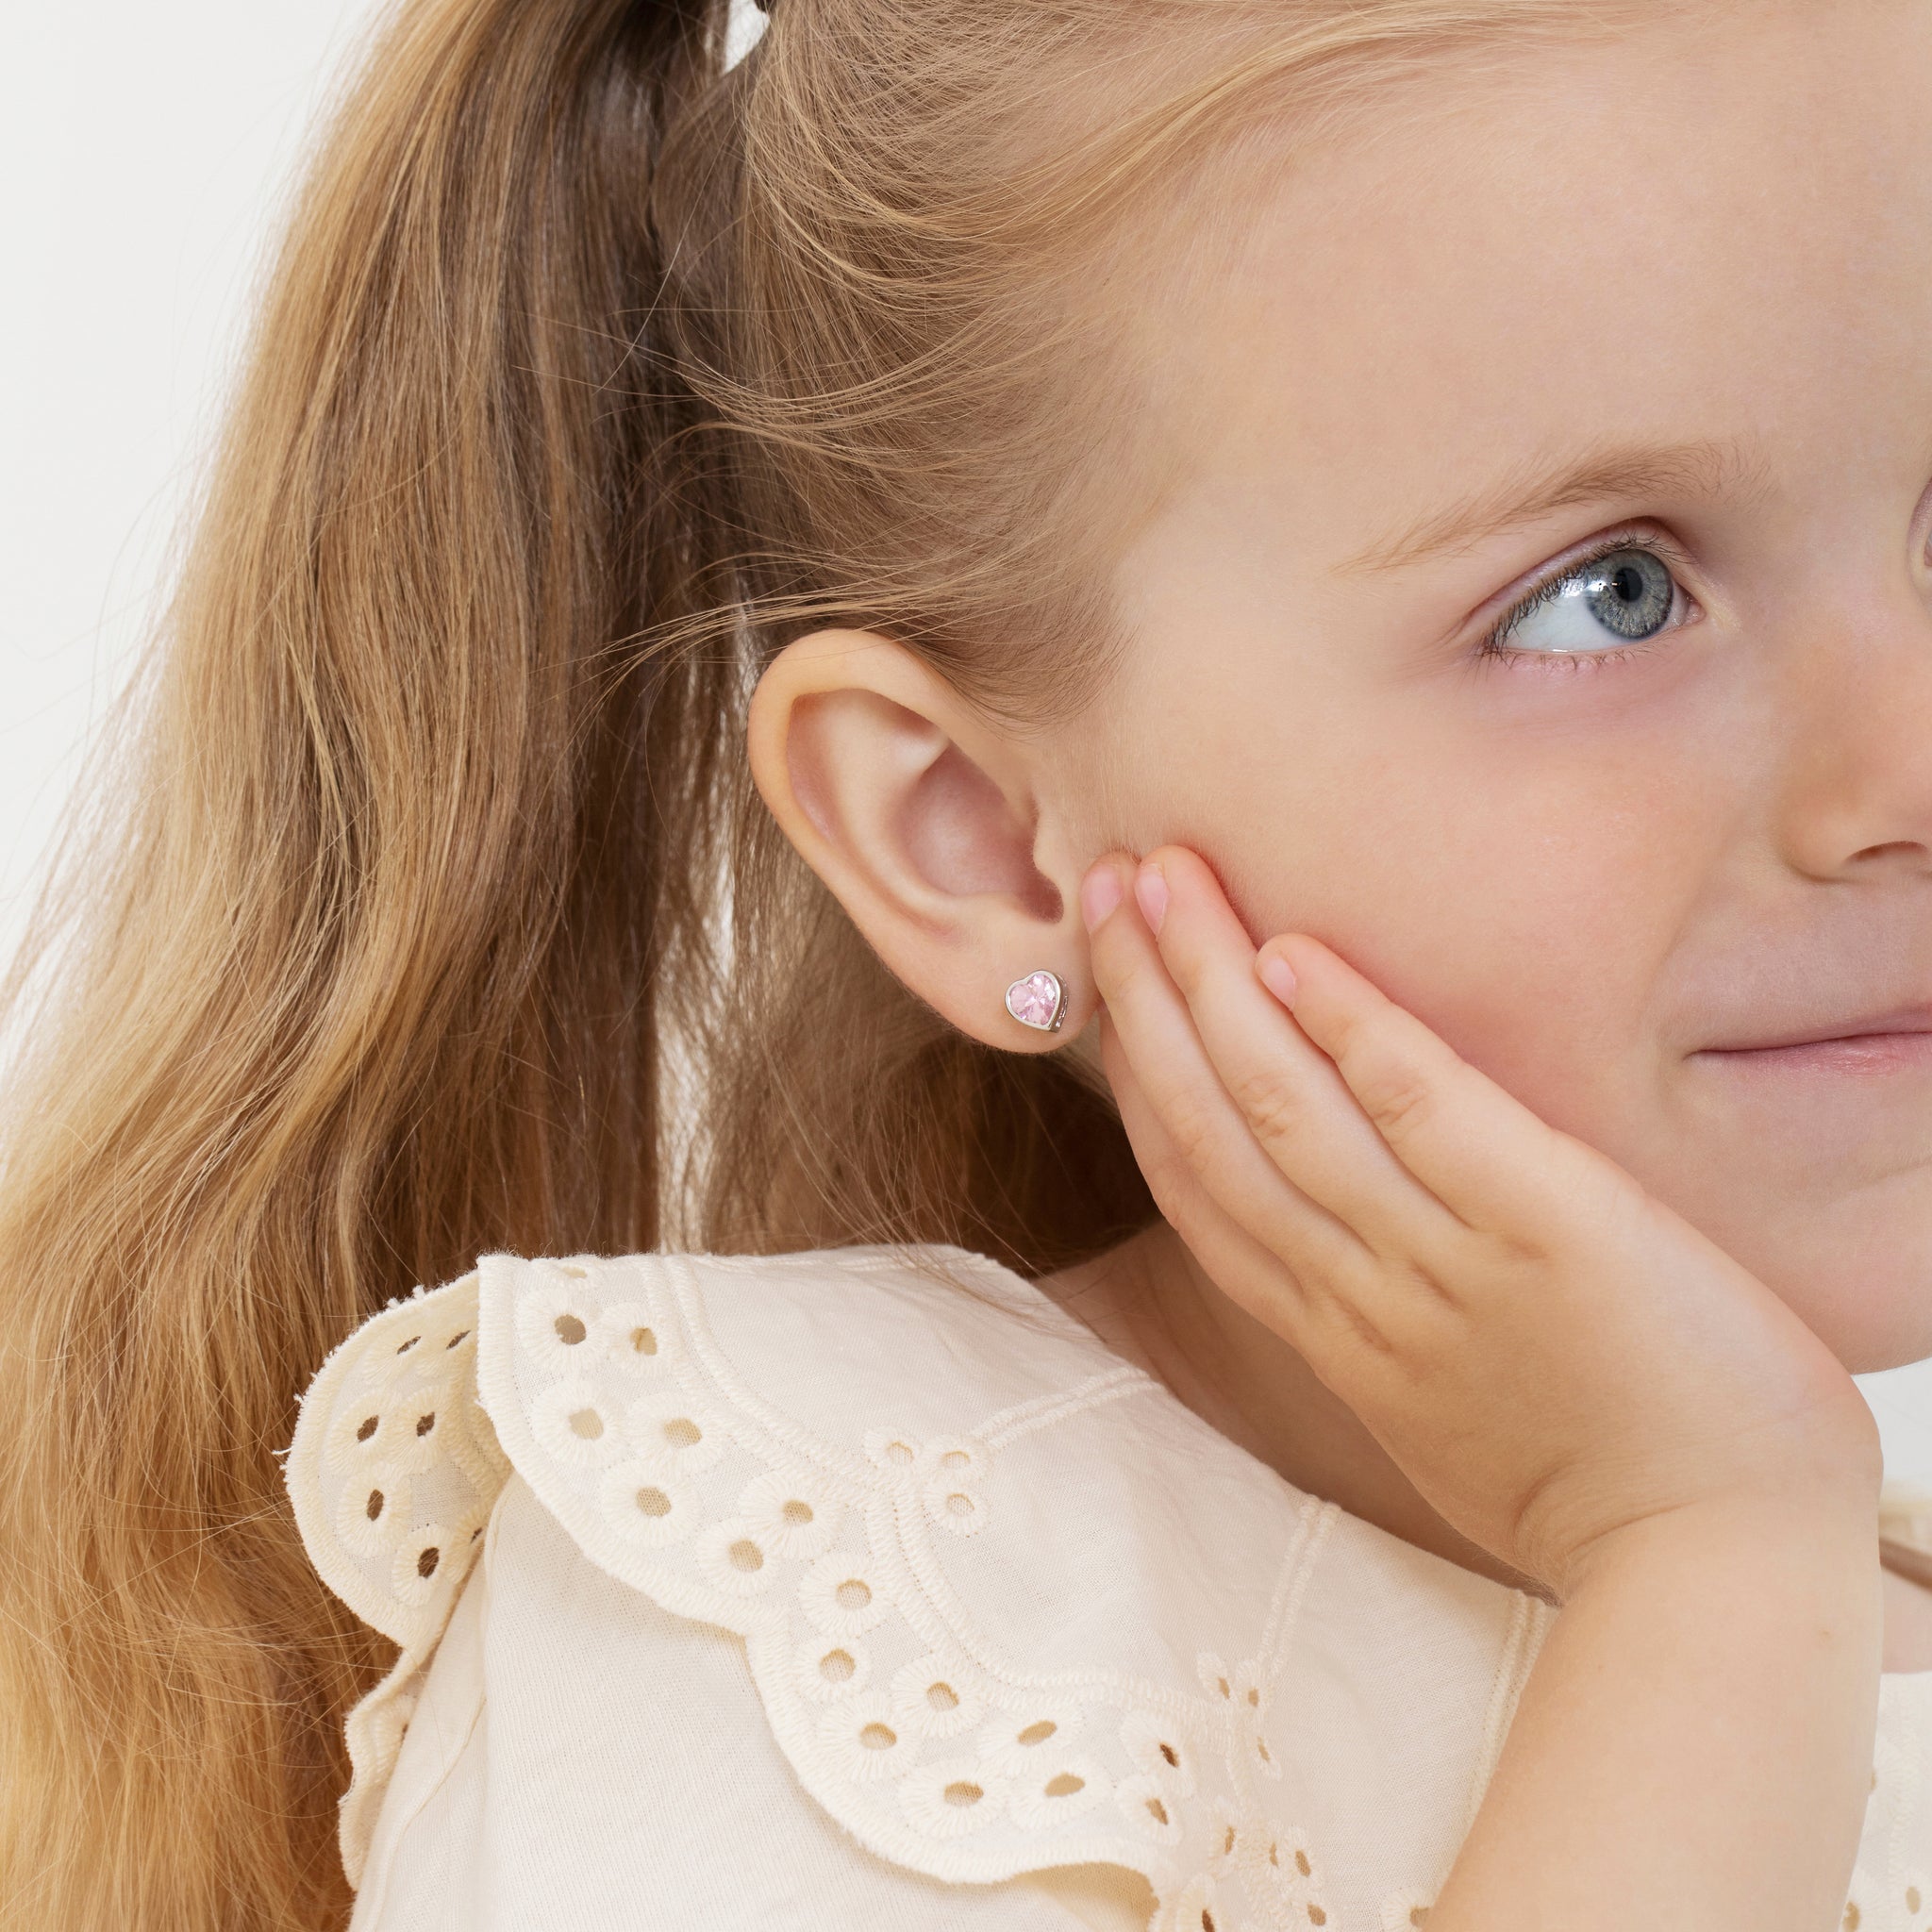 7 Best Baby Diamond Earrings for Baby Girls with Safety Backs